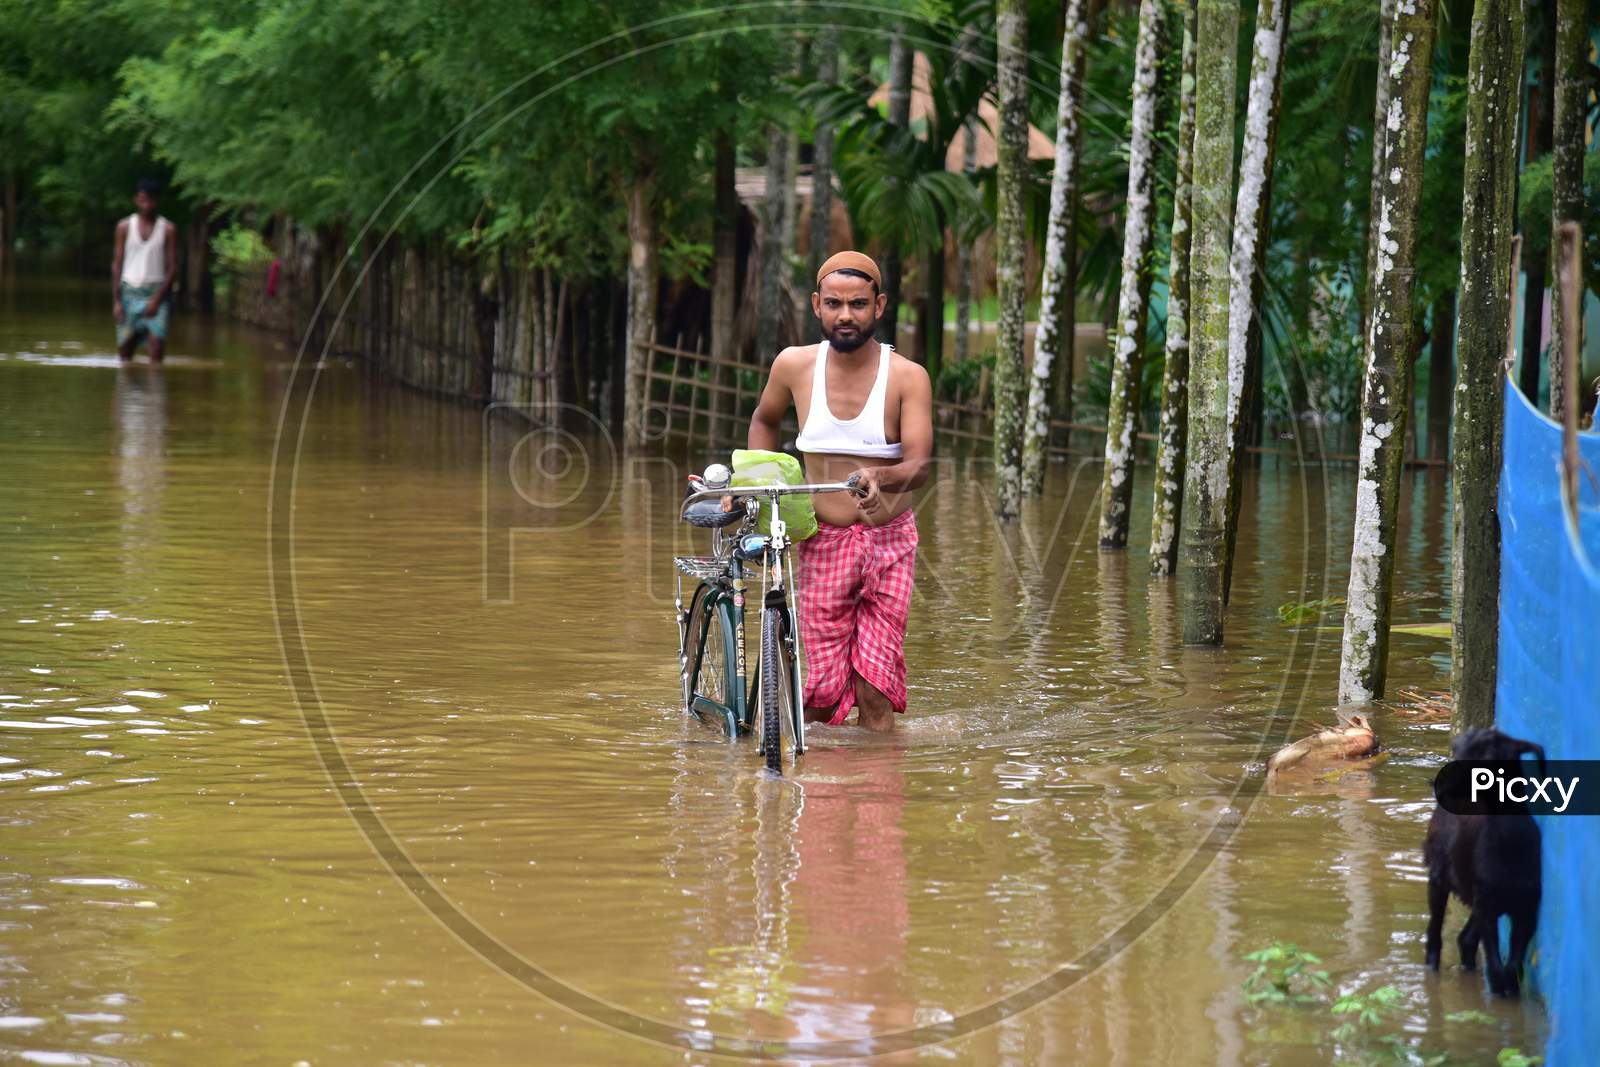 A man wades his way through flooded waters in a flood-affected area in Nagaon, Assam on July 22, 2020